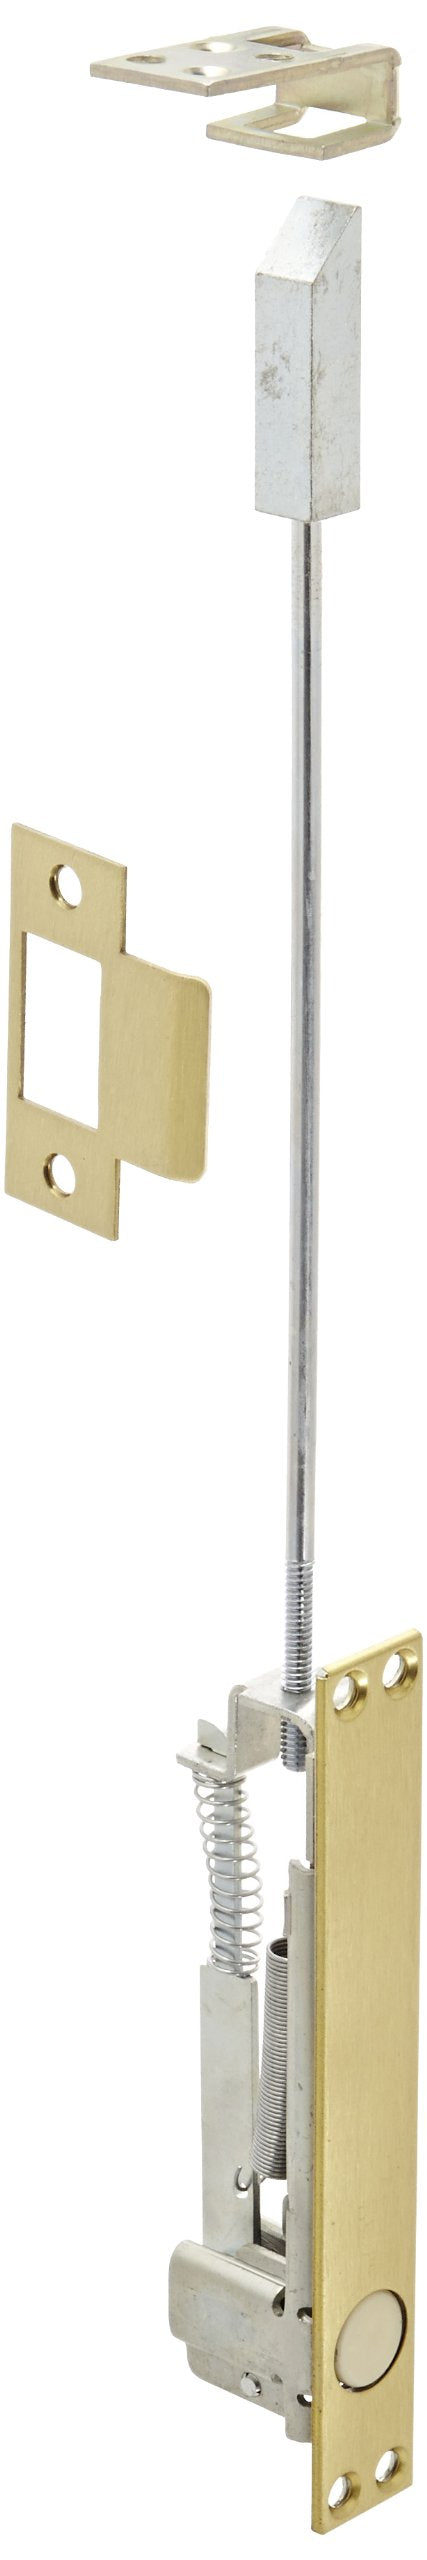 Rockwood 2849.4 Self-Latching Flush Bolt with Bottom Fire Bolt for Fire Rated Metal Doors, 1" Width x 6-3/4" Height, Brass Satin Clear Coated Finish